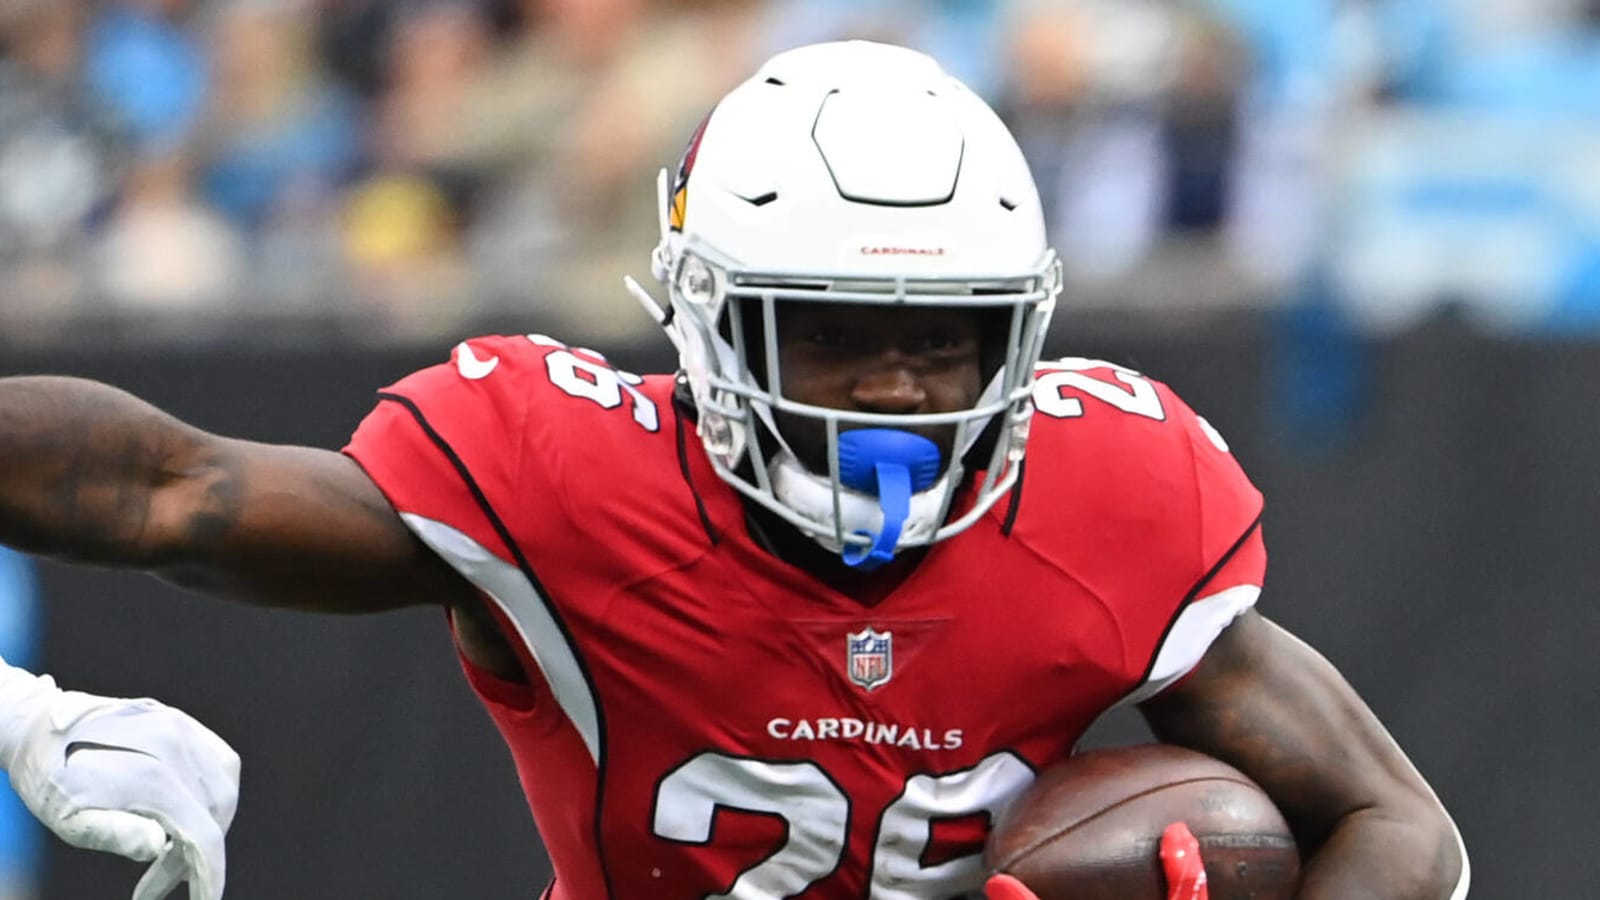 Report: Eno Benjamin unhappy with role before being cut by Cardinals